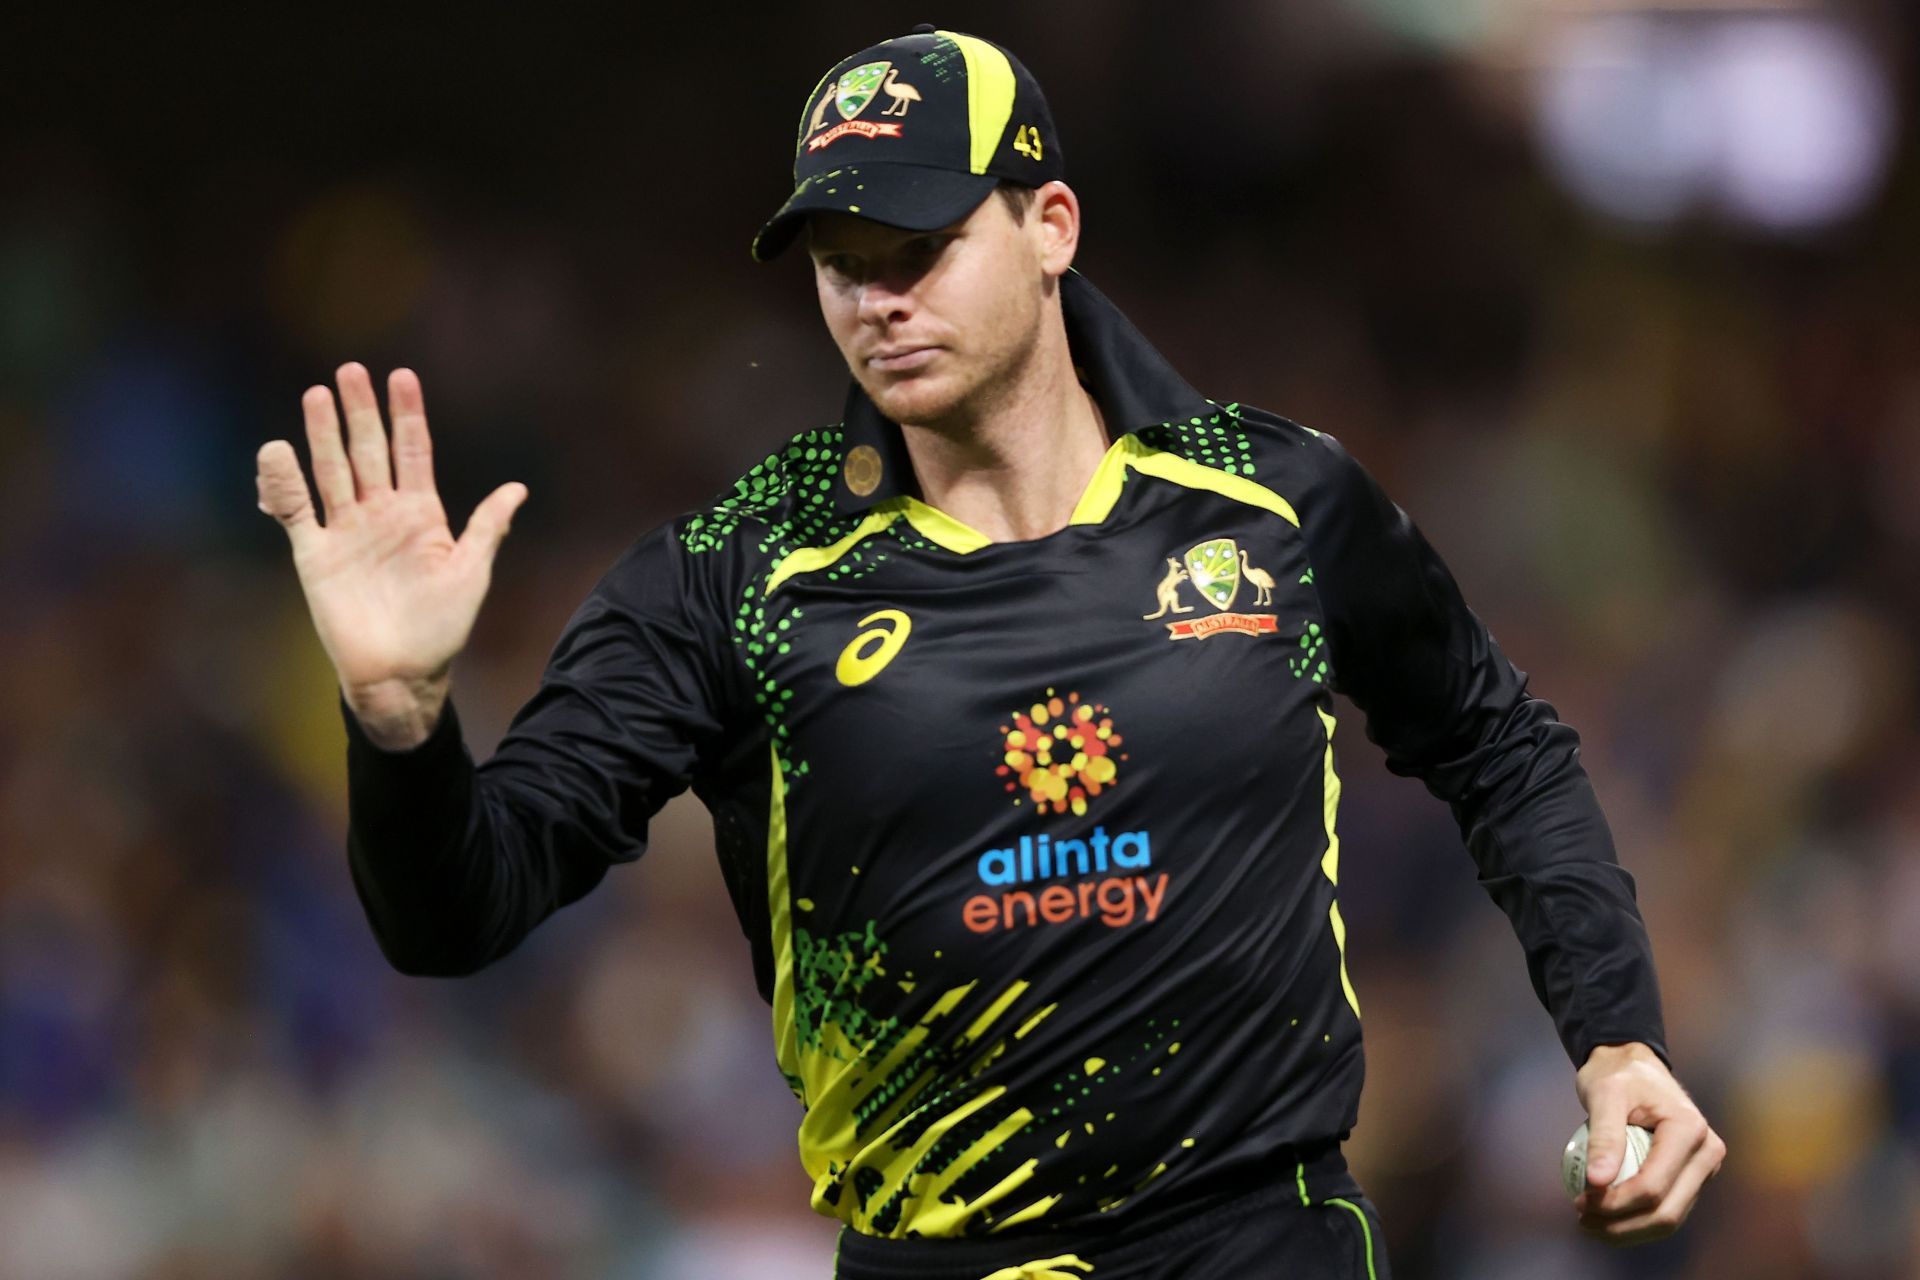 Steve Smith recently played for Australia in the T20I series against Sri Lanka